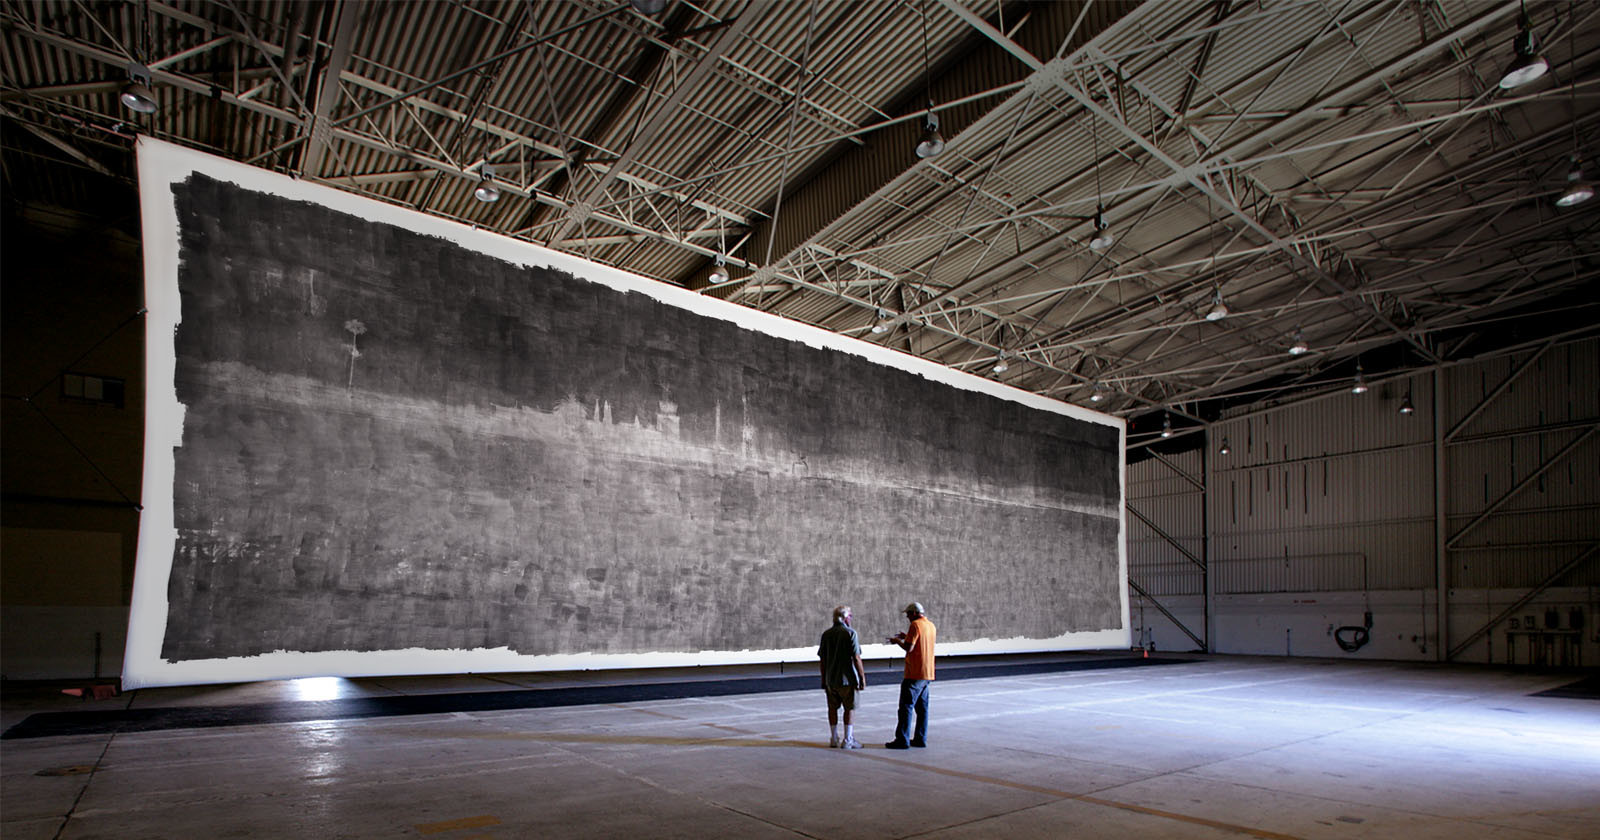 The Worlds Largest Photo Returns Home to California